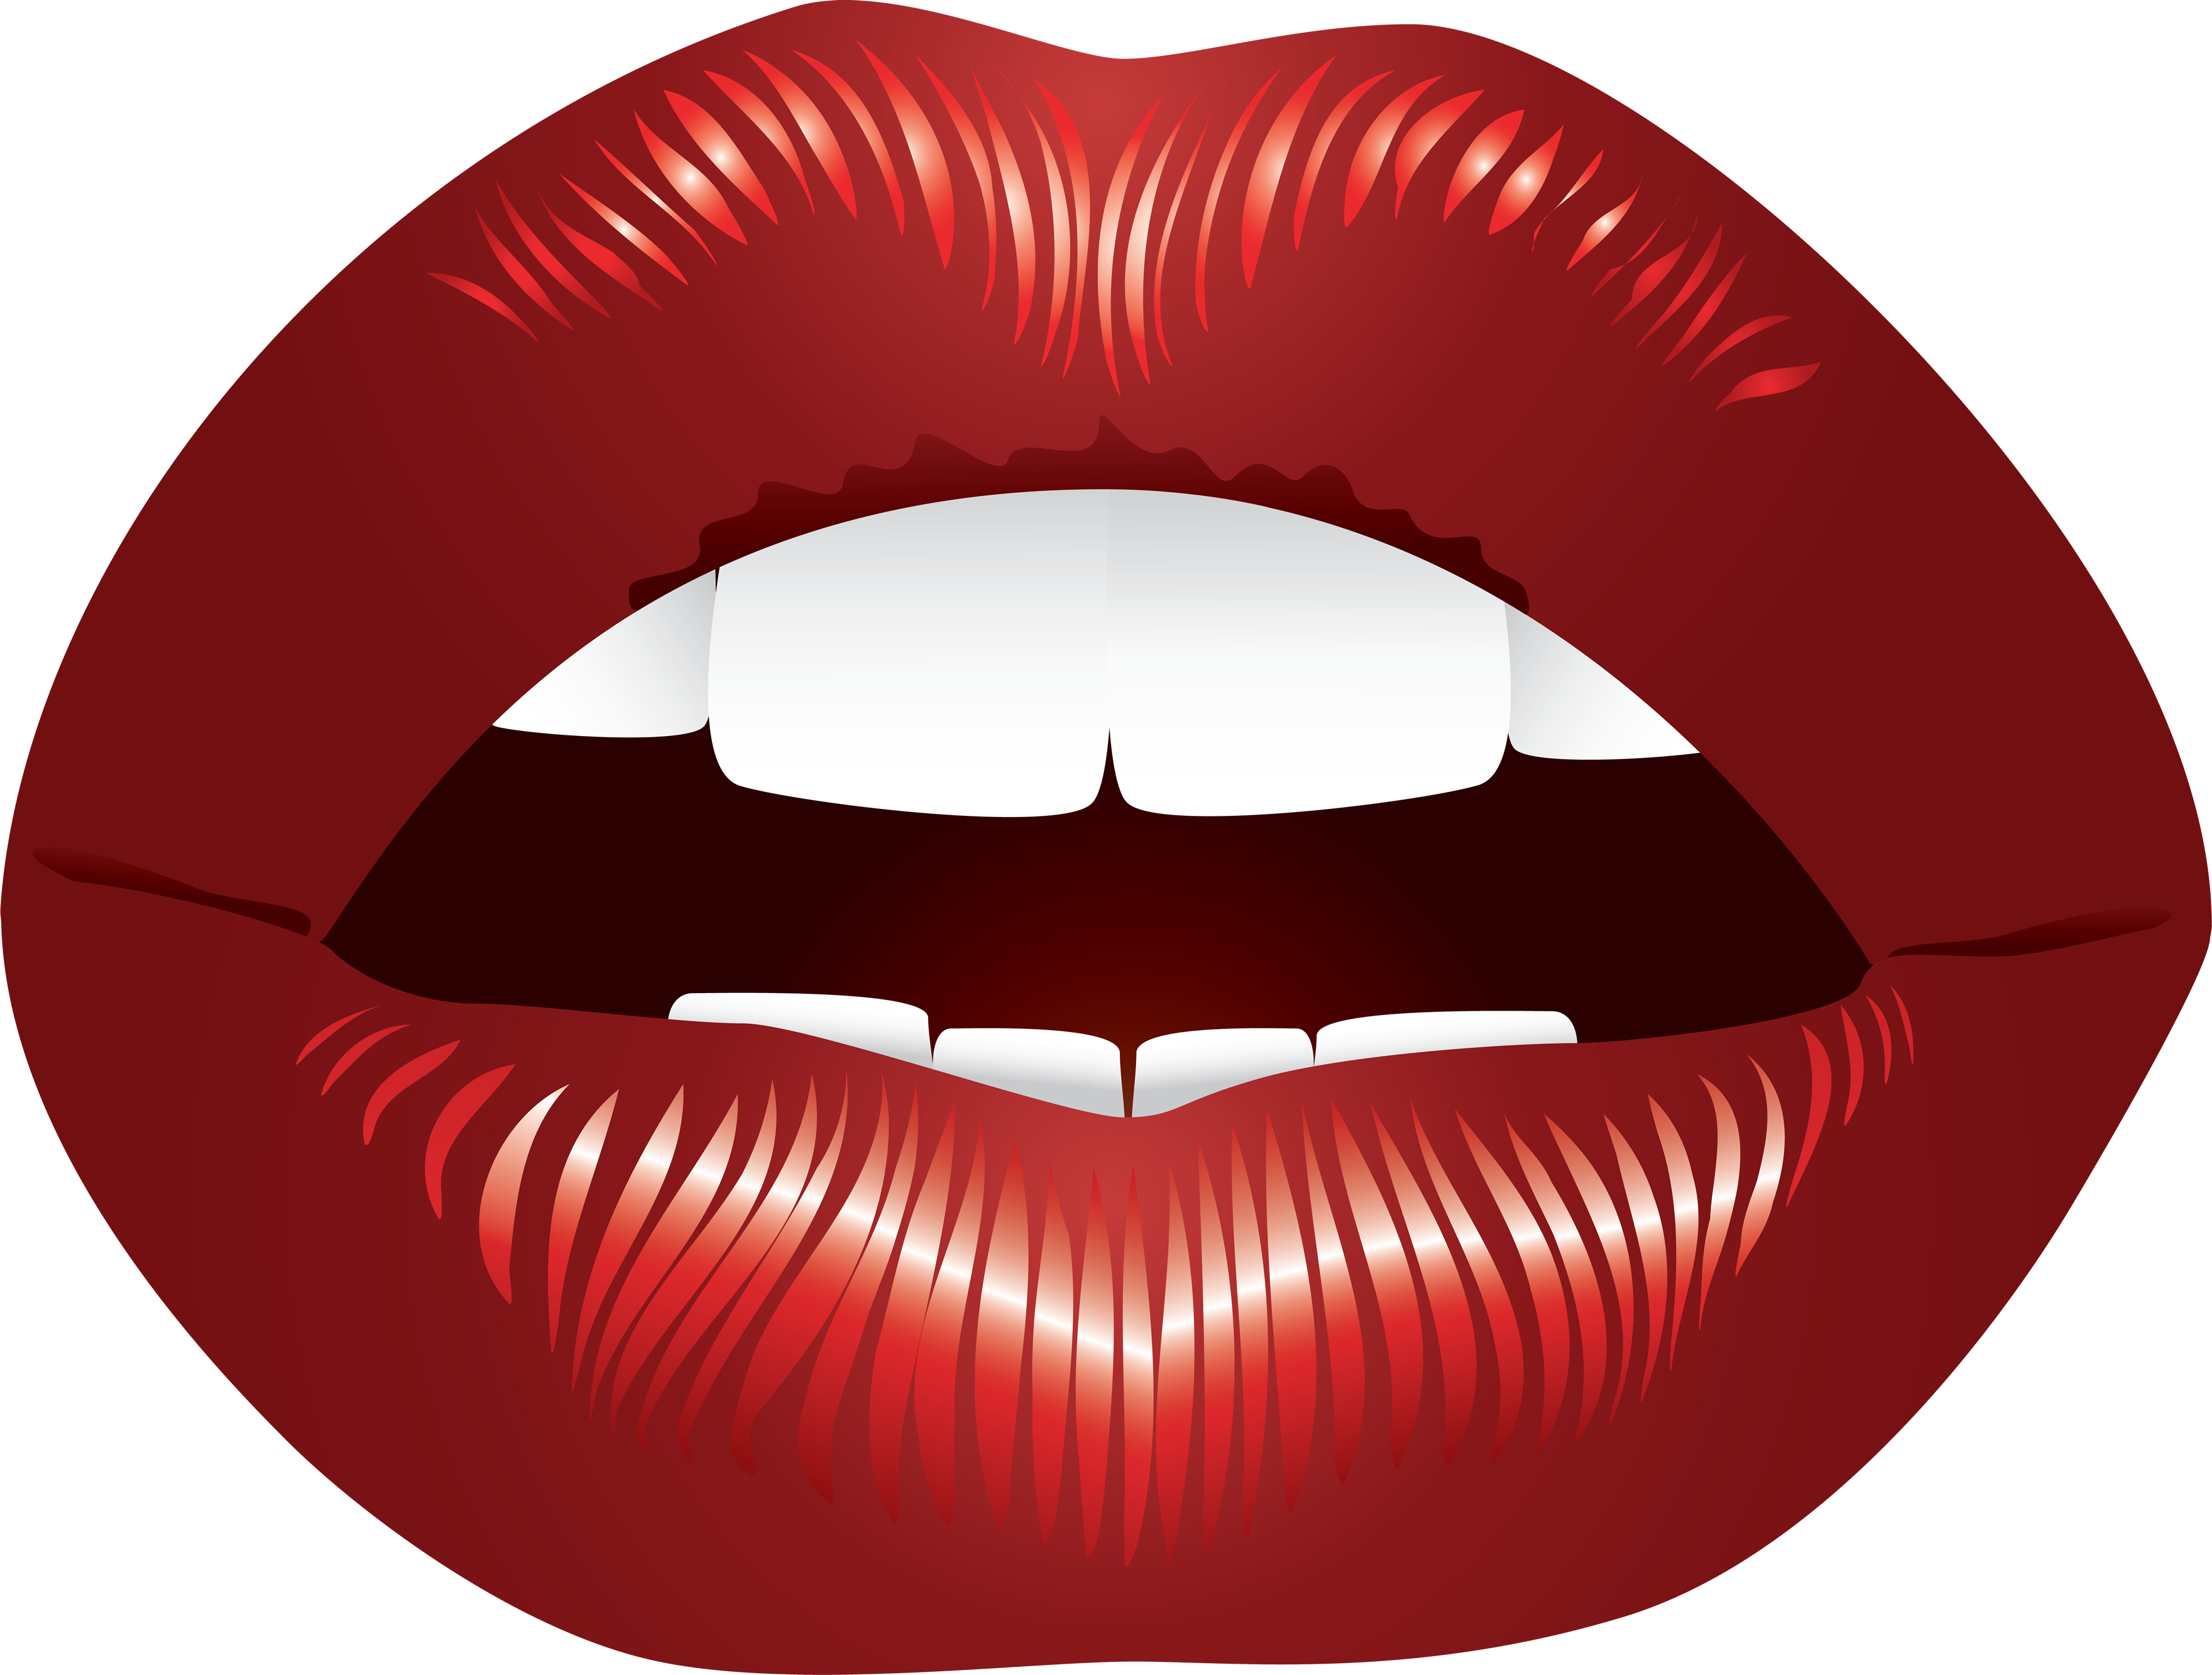 Talking mouth clipart 3